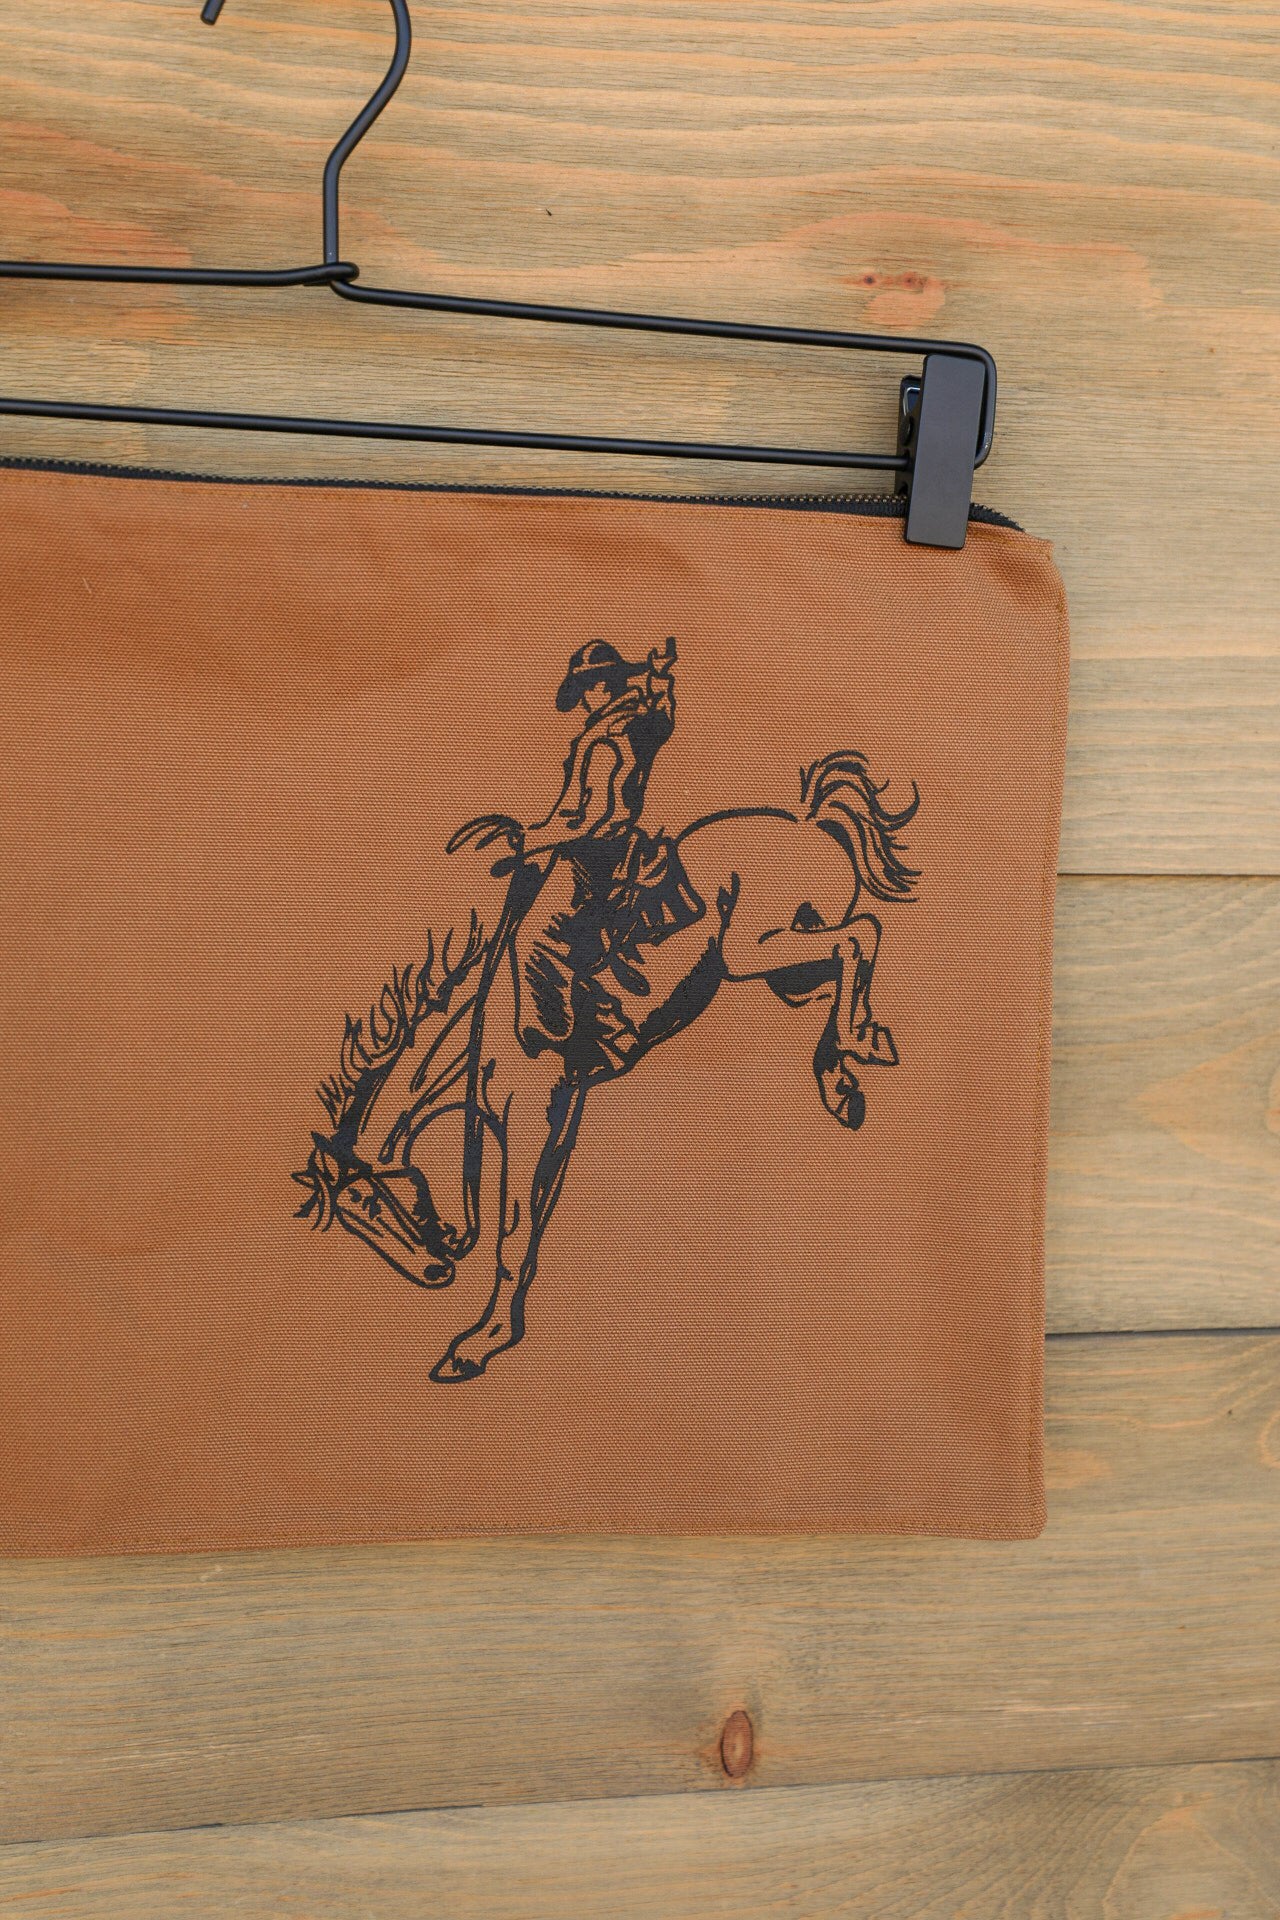 Bronc Rider Clutch-Purses/Bags-Crooked Horn Company, Online Women's Fashion Boutique in San Tan Valley, Arizona 85140